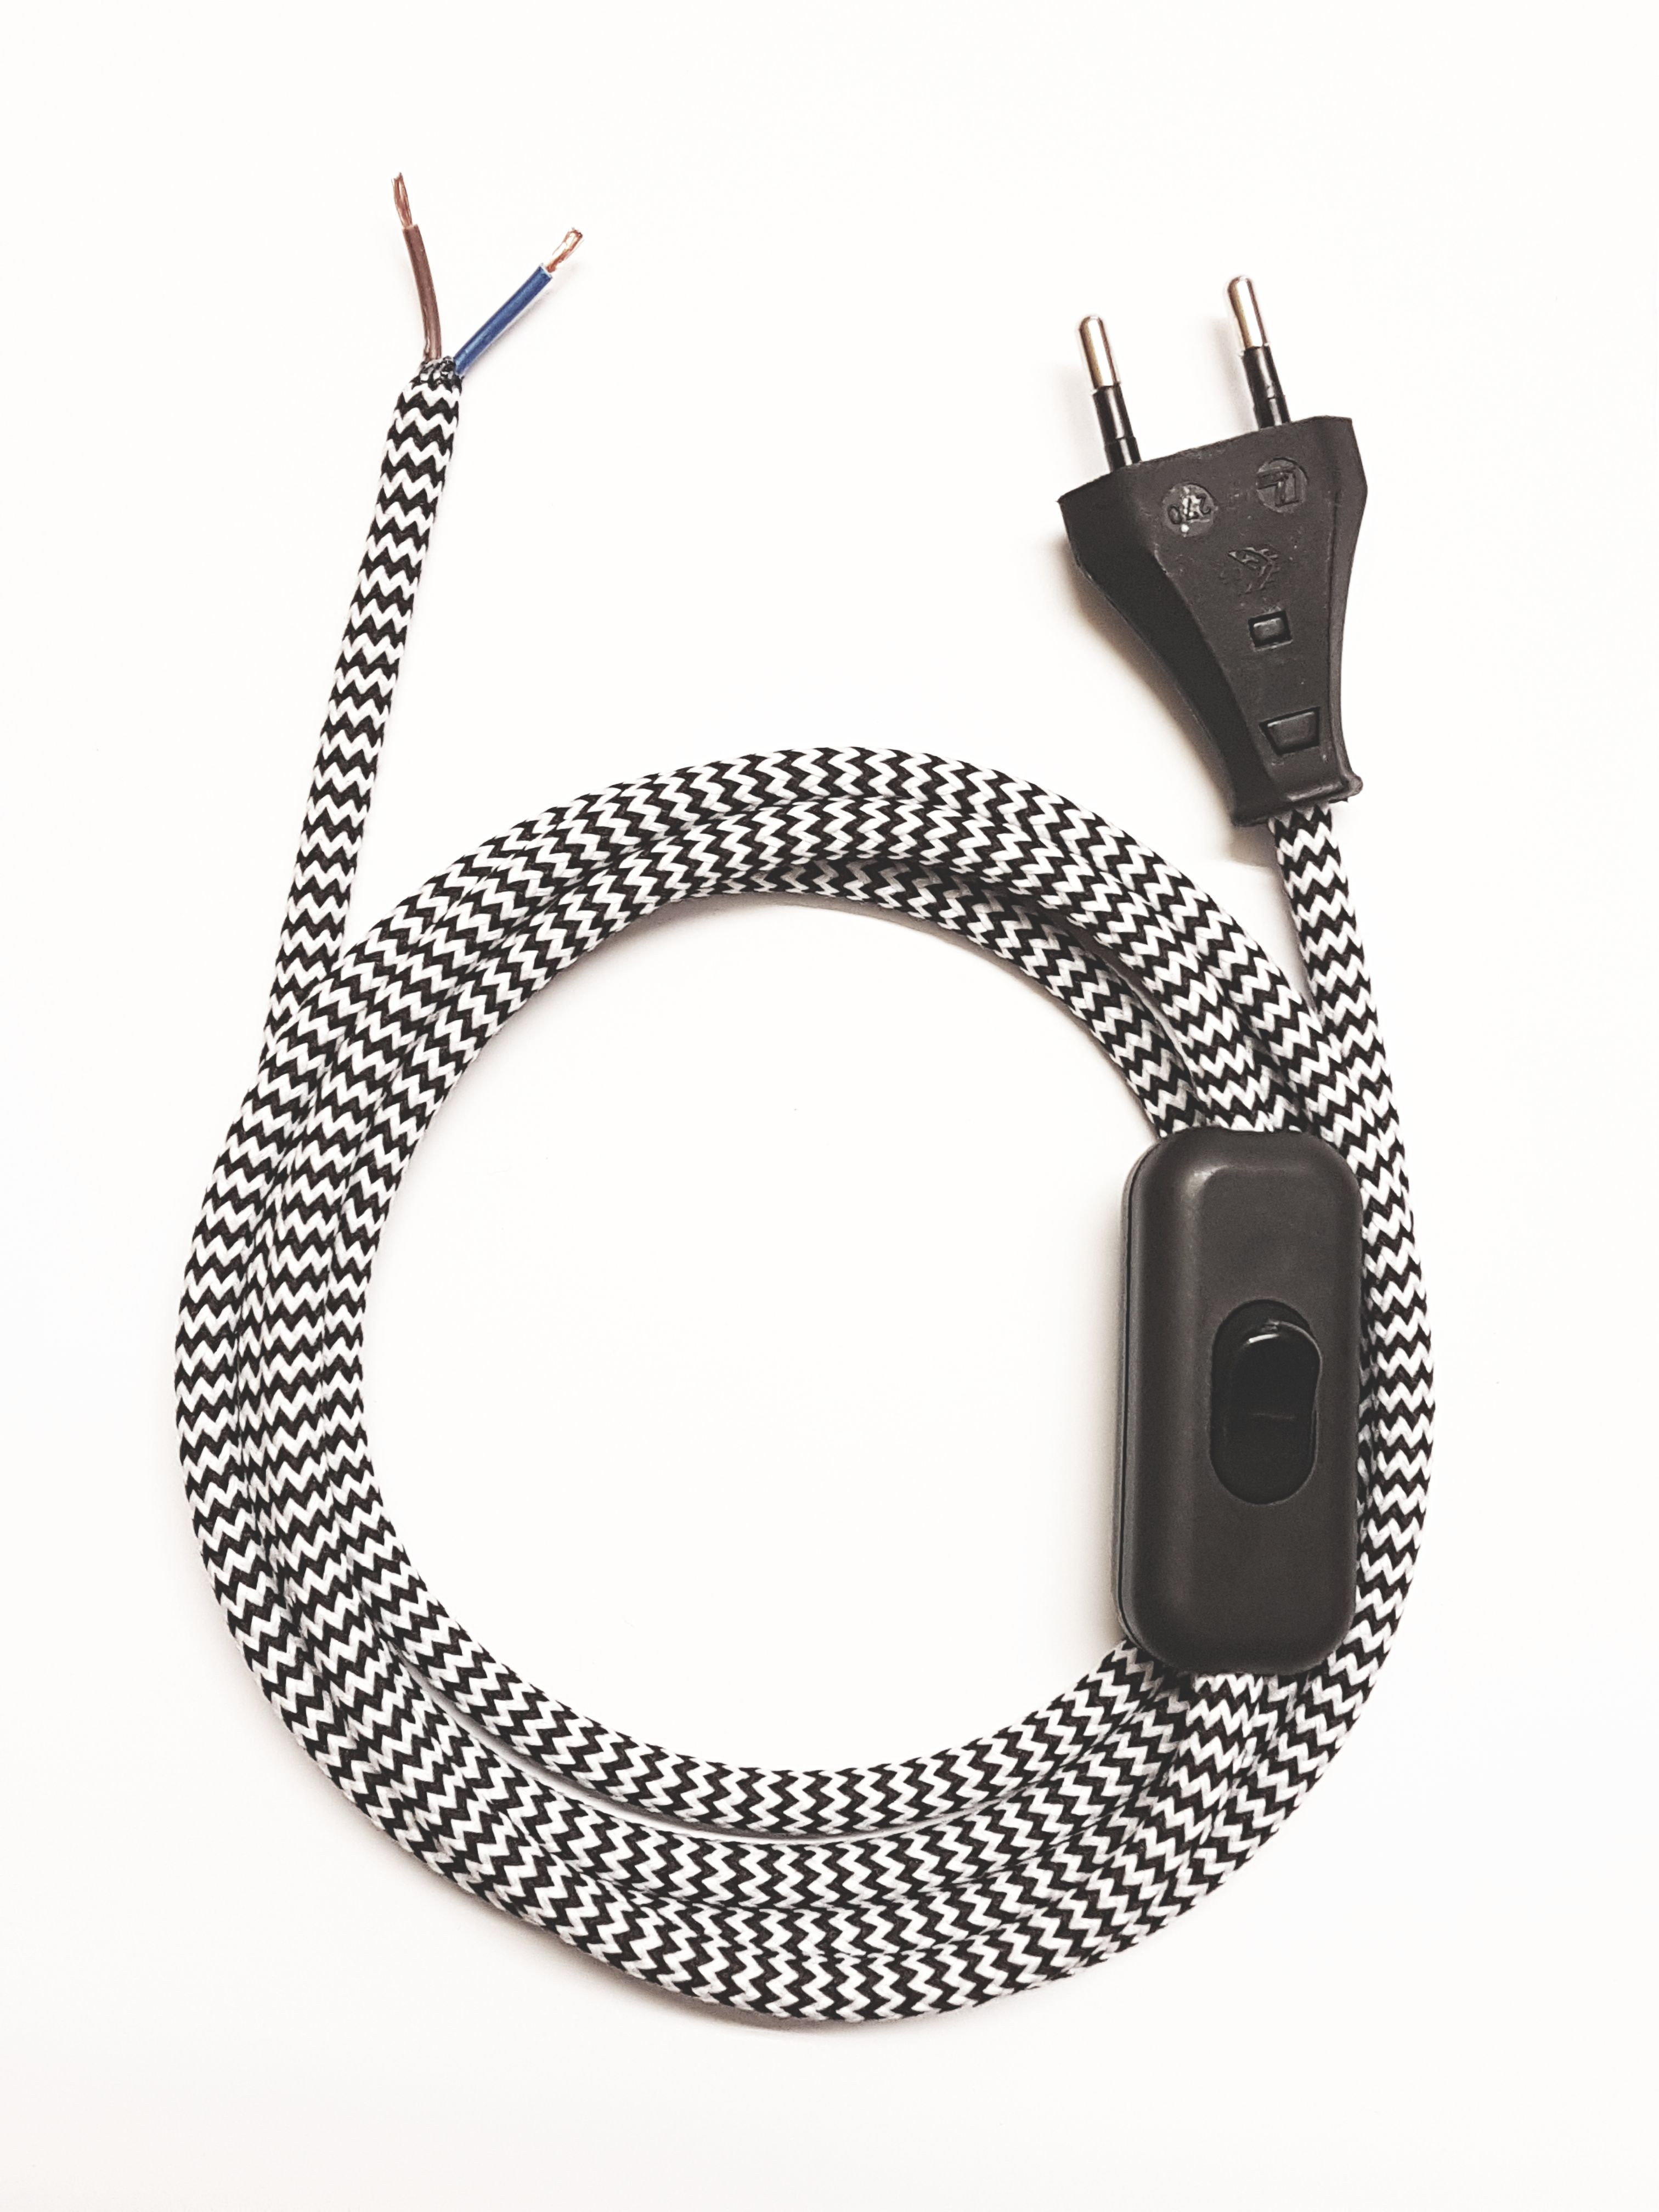 Assembled Supply Cord with Plug and Inline Cord Switch Black-White Zig Zag 2 Core